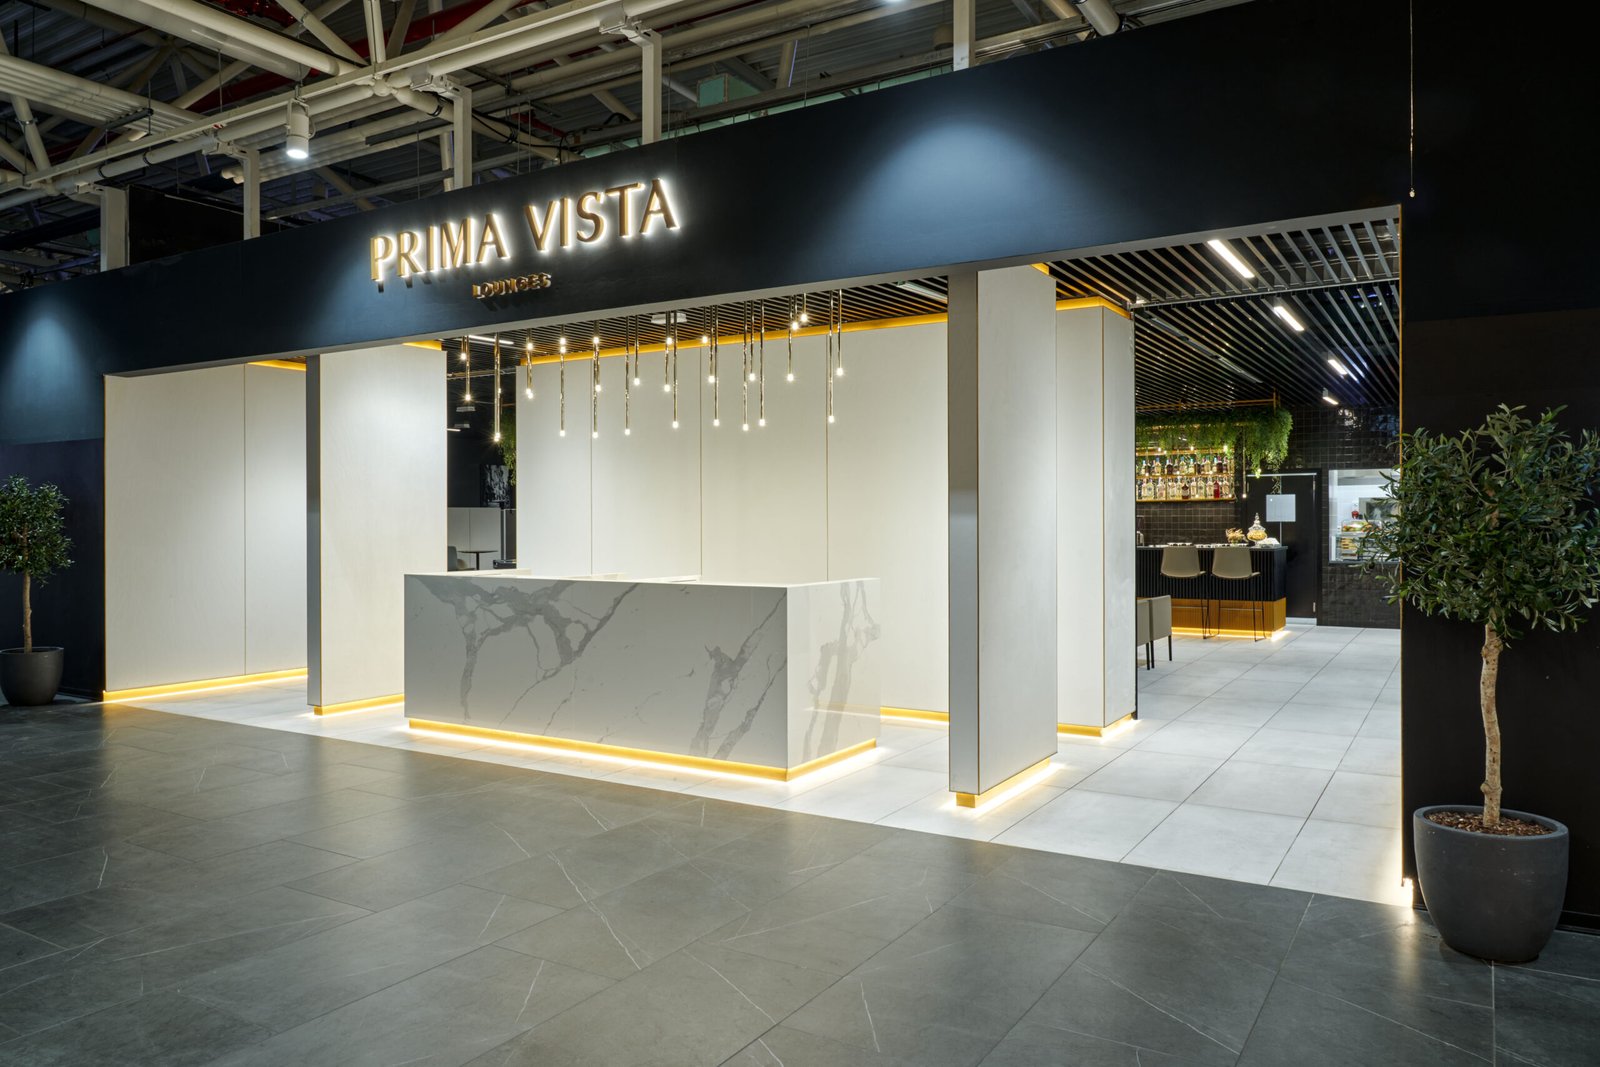 The elegant entrance of Prima Vista Lounge, featuring minimalist design, soft lighting, and a welcoming marble reception desk, by Indy Blue Studio.